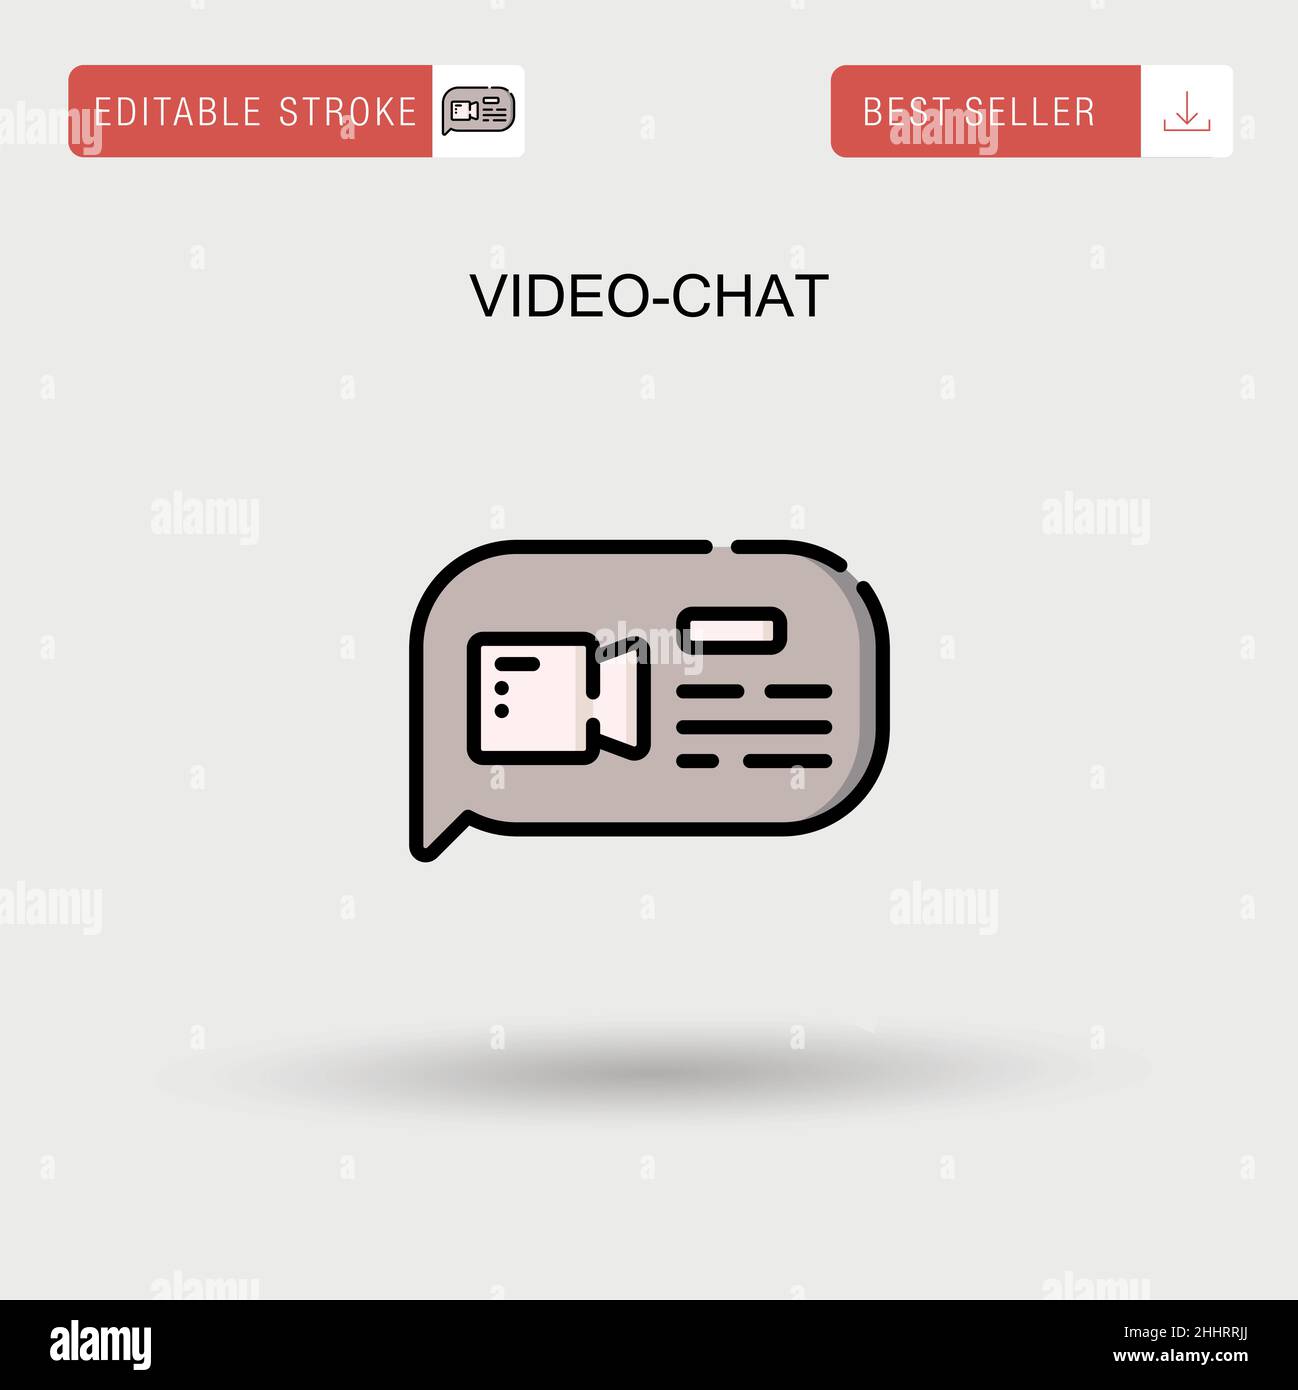 Video-chat Simple vector icon. Stock Vector